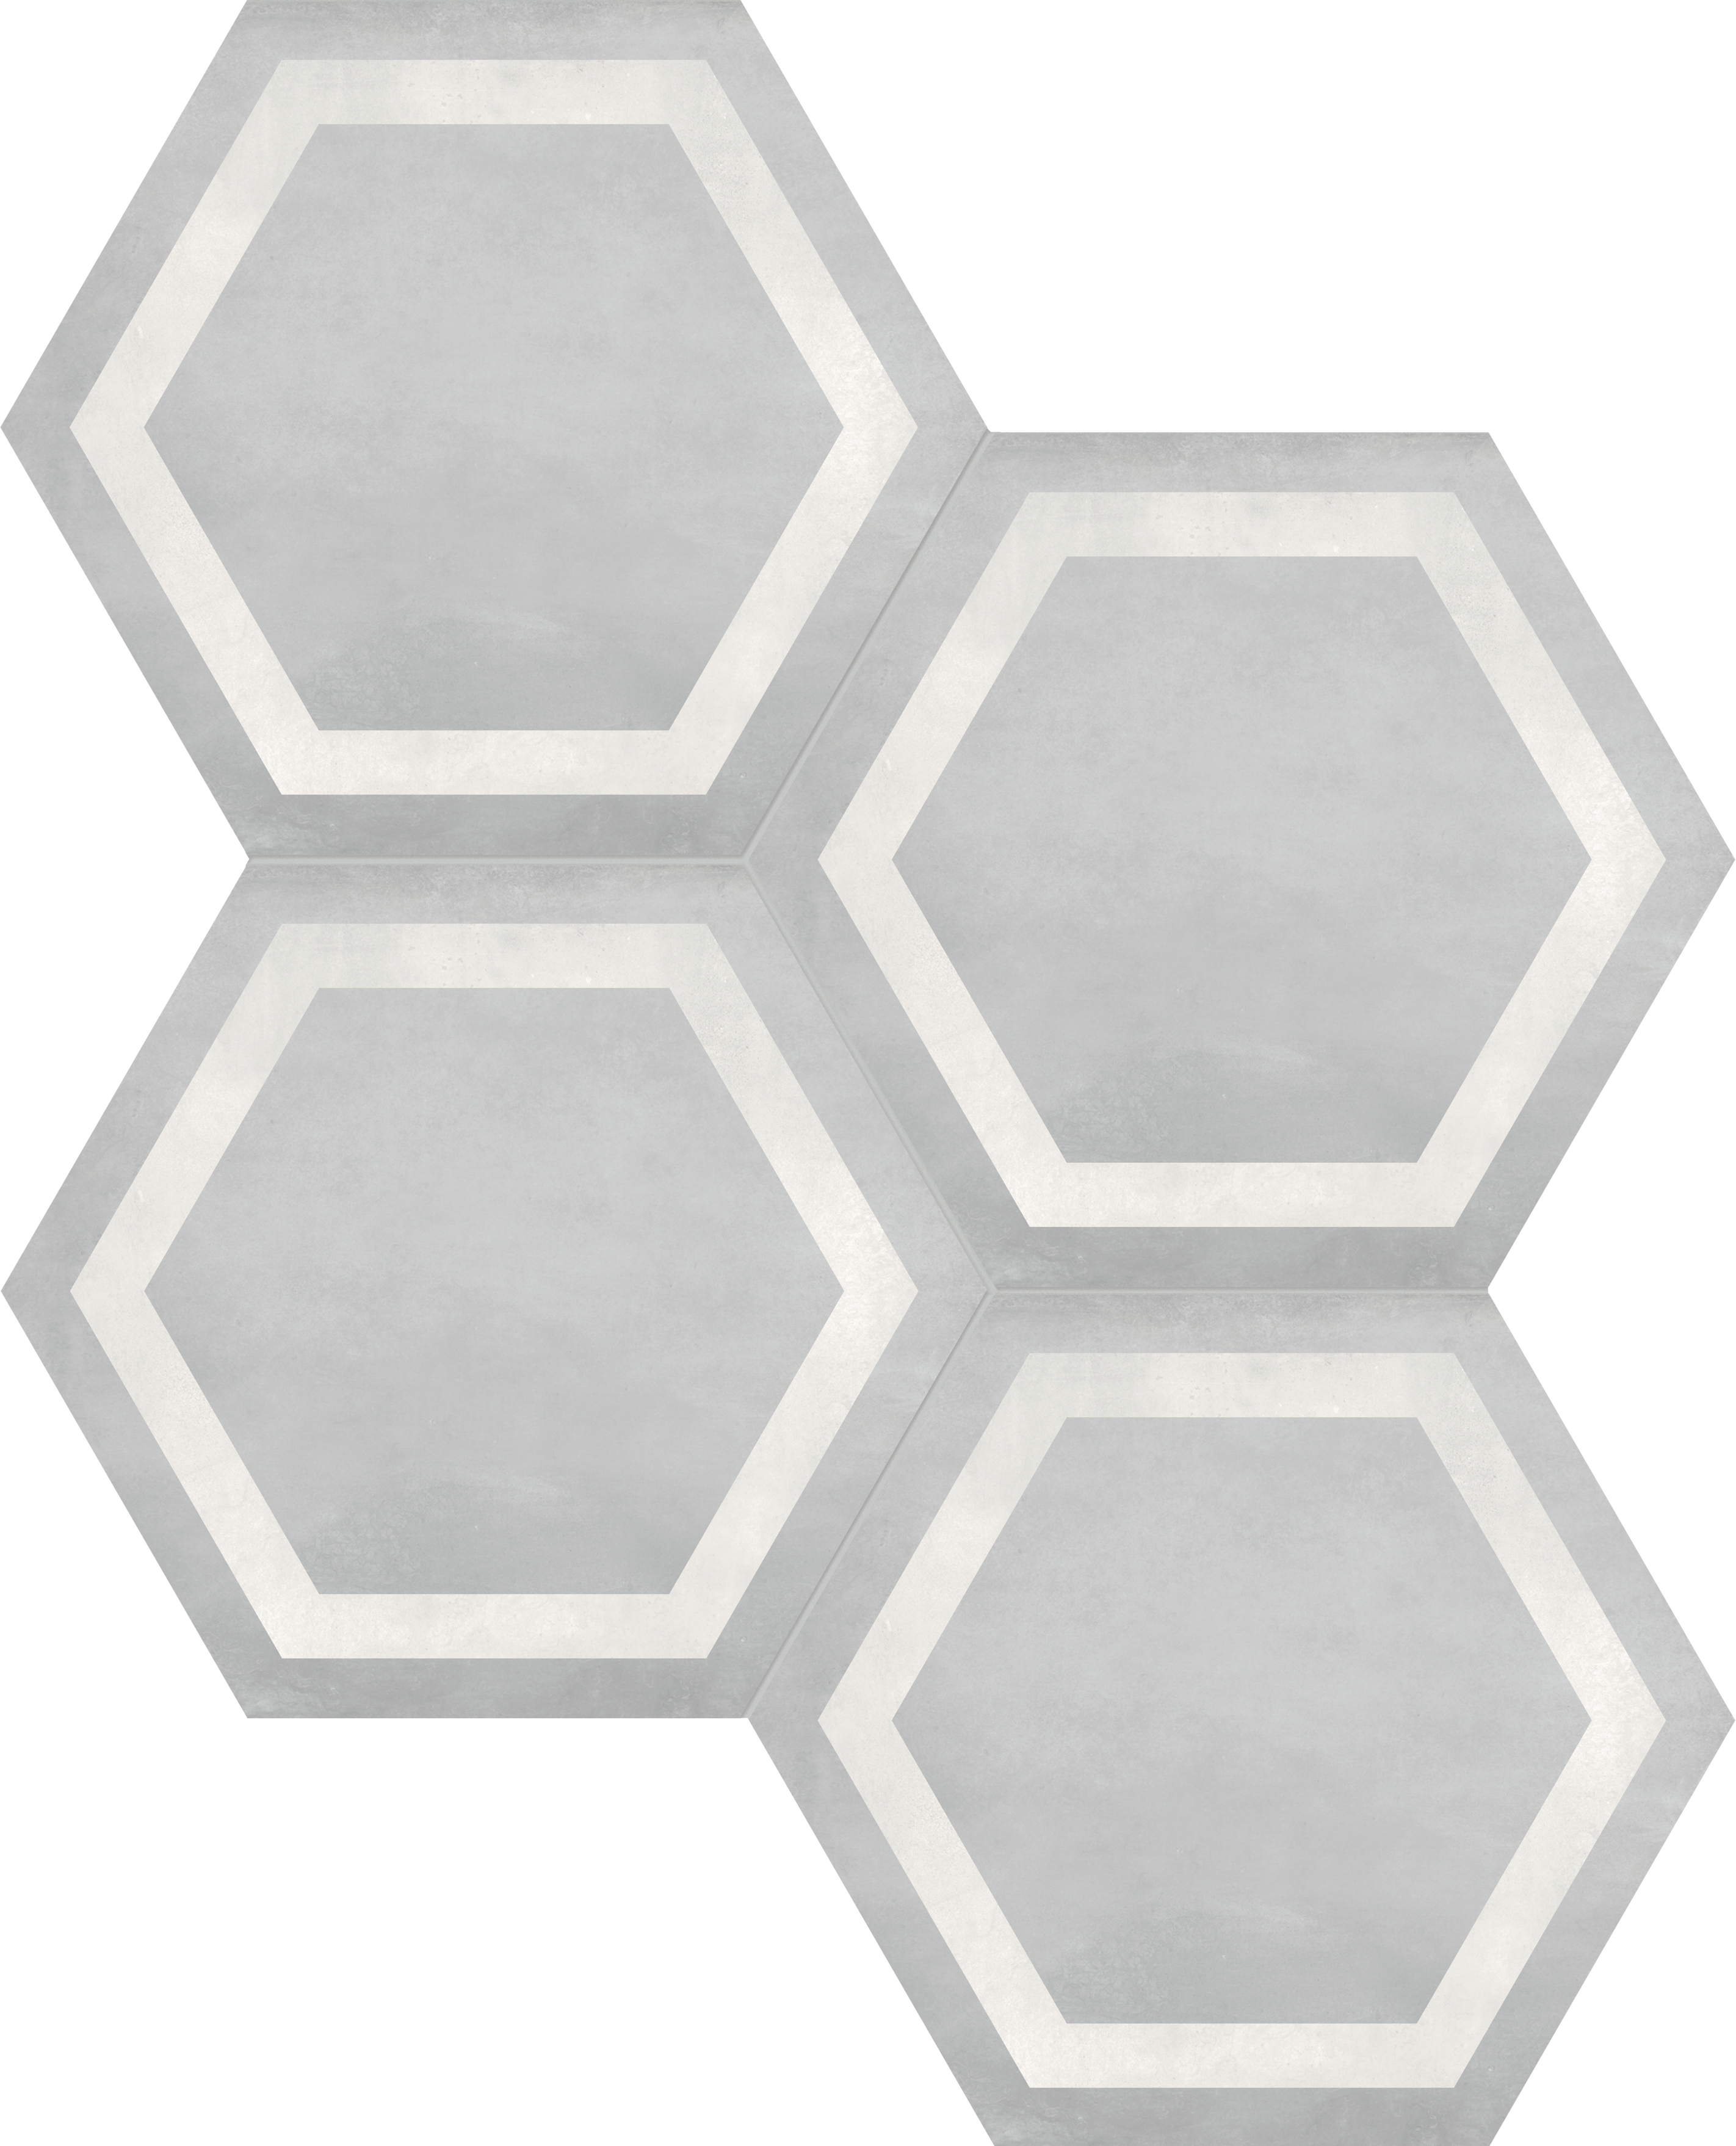 ice print pattern glazed porcelain deco tile from form anatolia collection distributed by surface group international matte finish pressed edge 7-inch hexagon shape